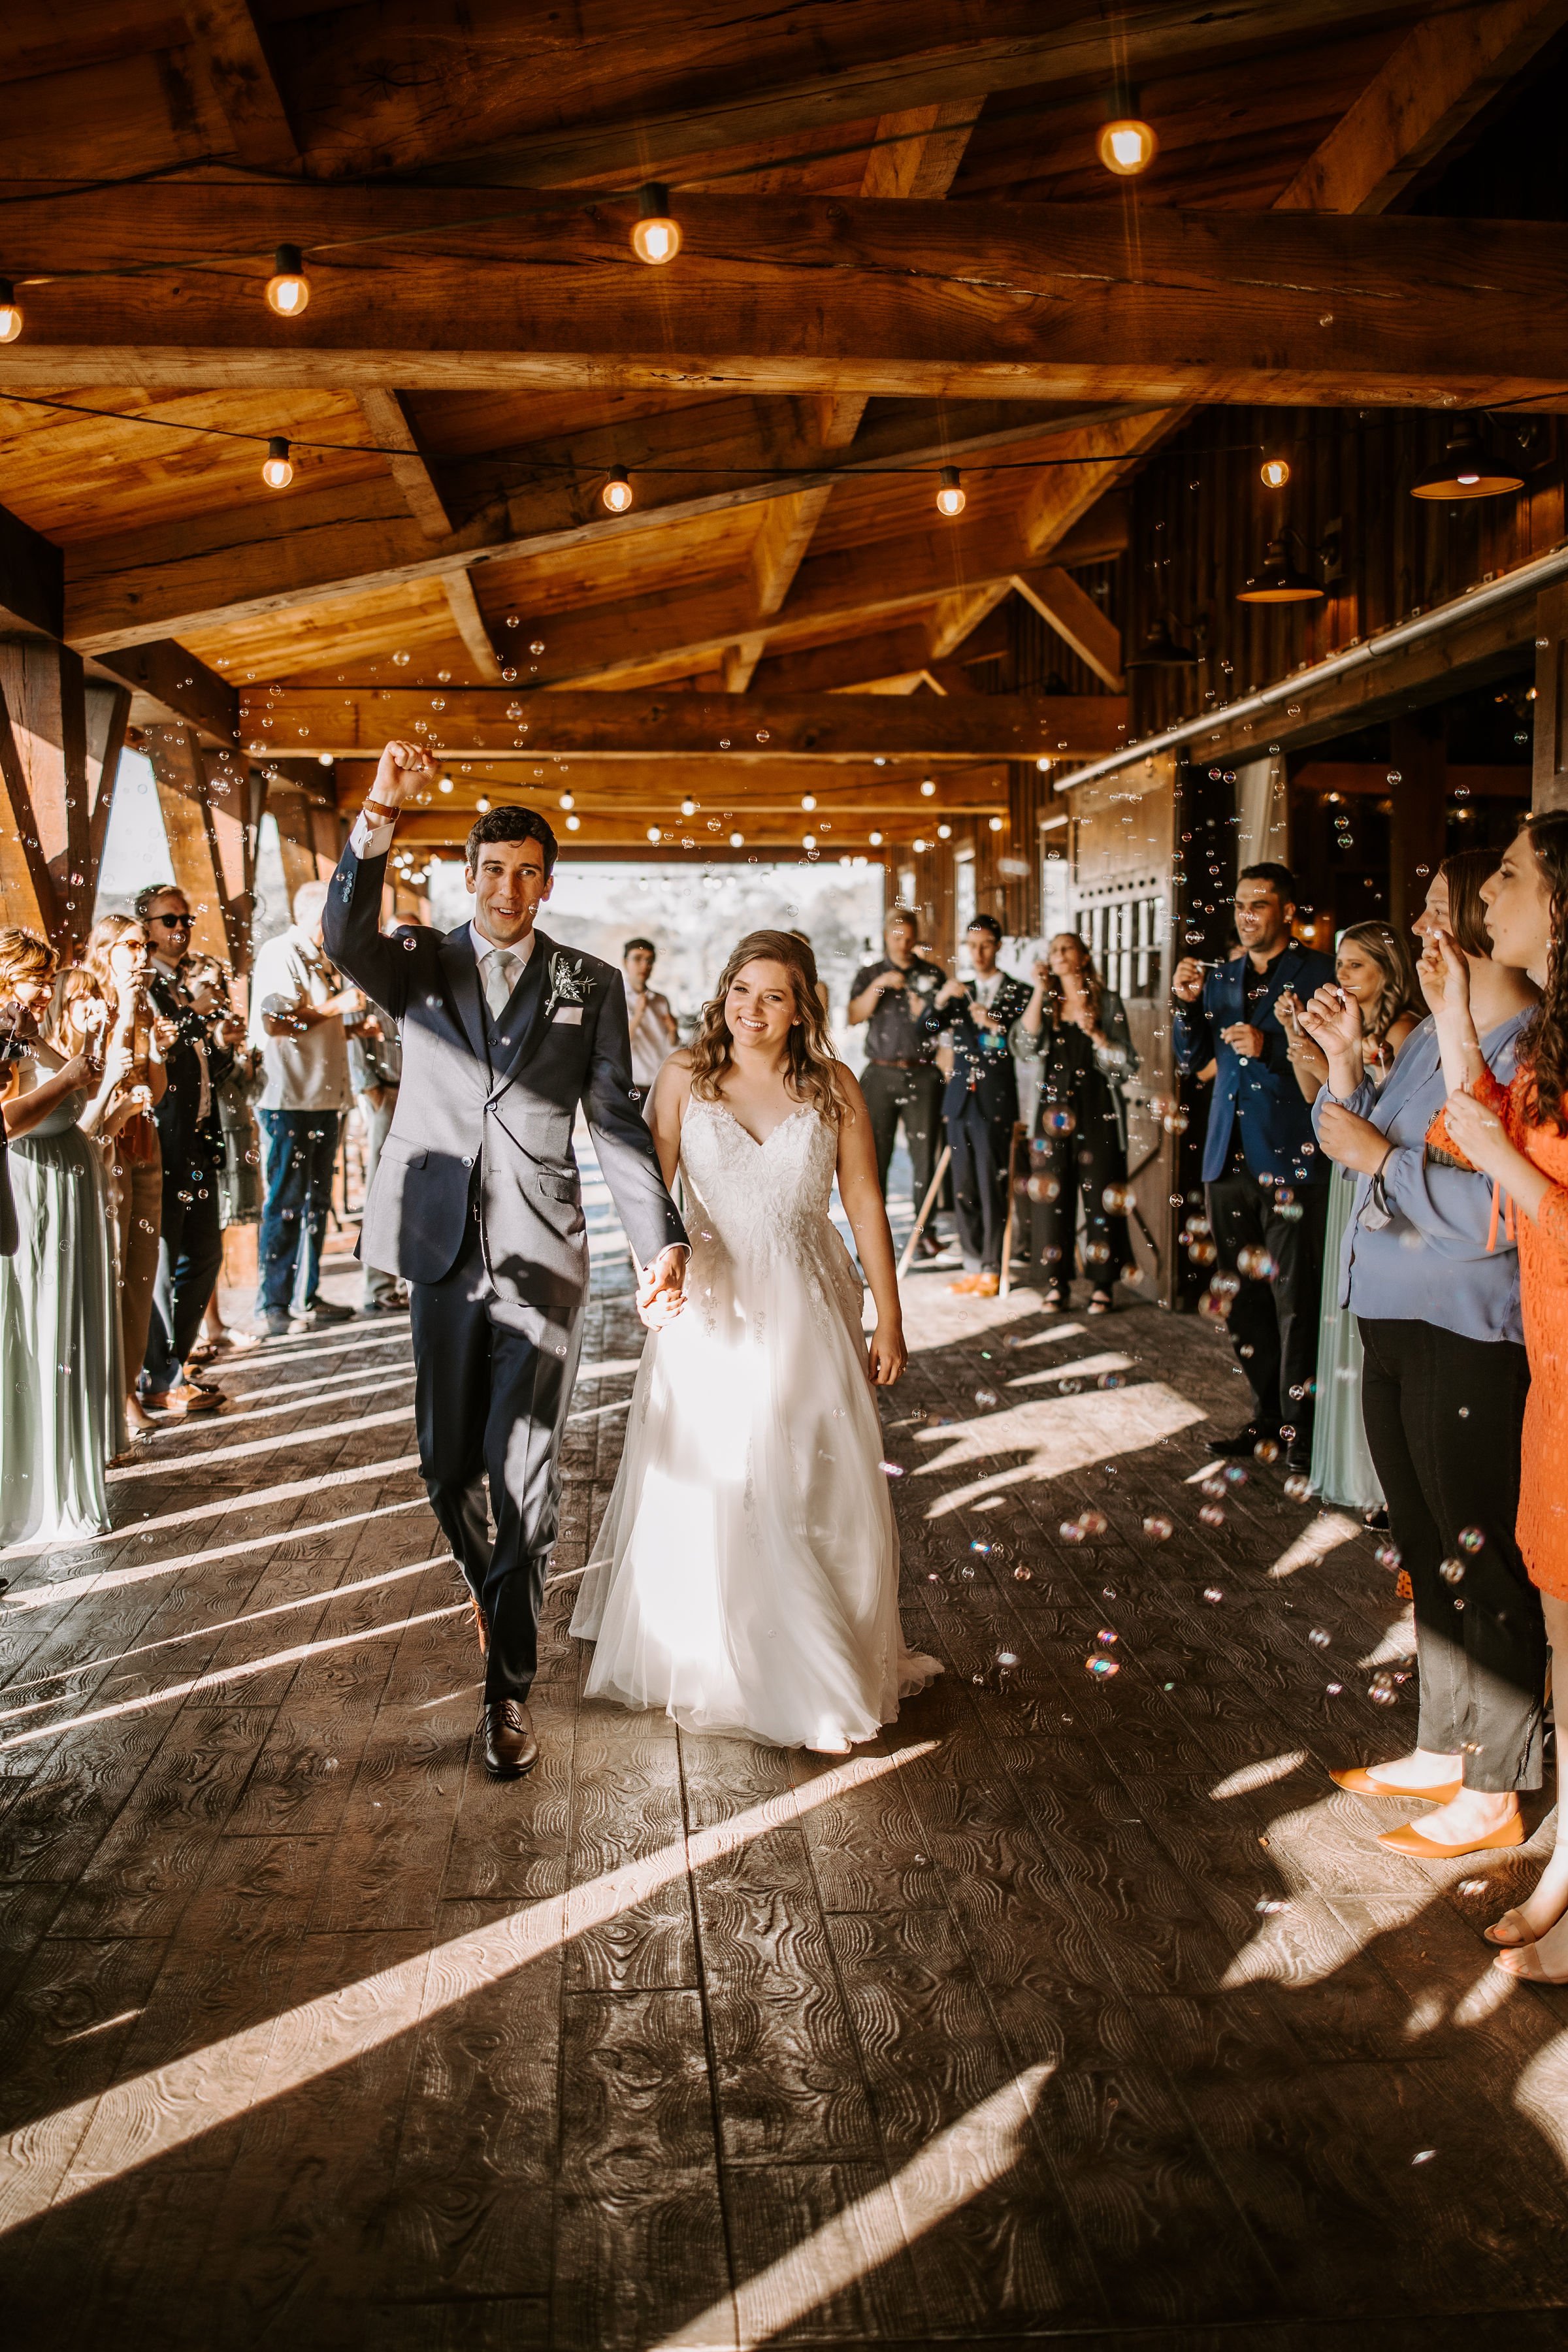 Wedding Exit Ideas for Your Perfect Send-Off